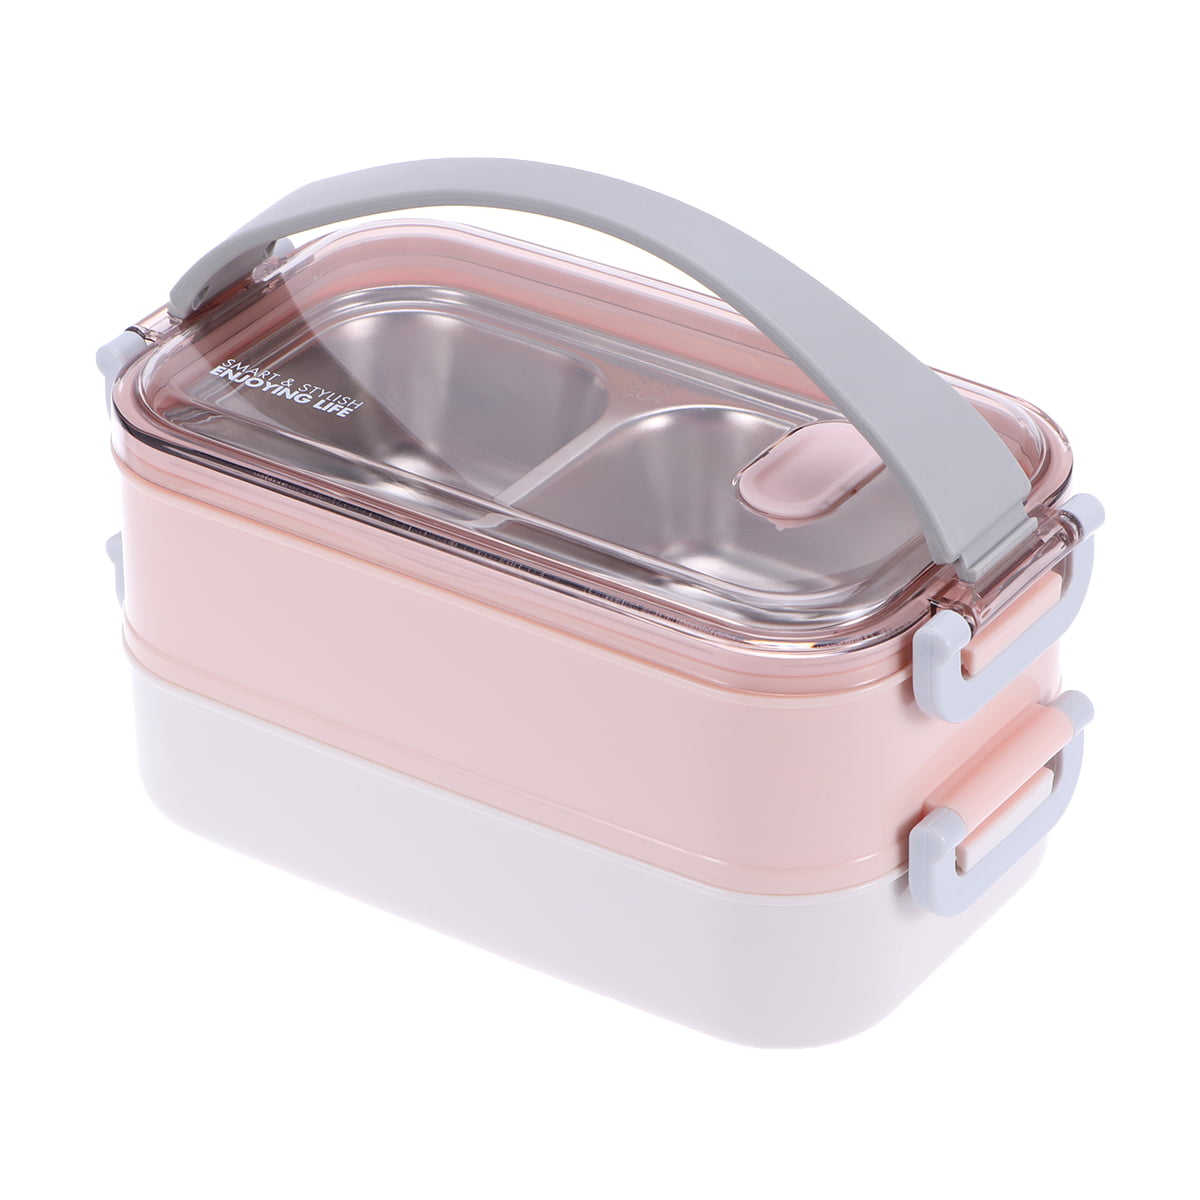 Stainless Steel Insulated Lunch Box - FFEZ70704 - IdeaStage Promotional  Products